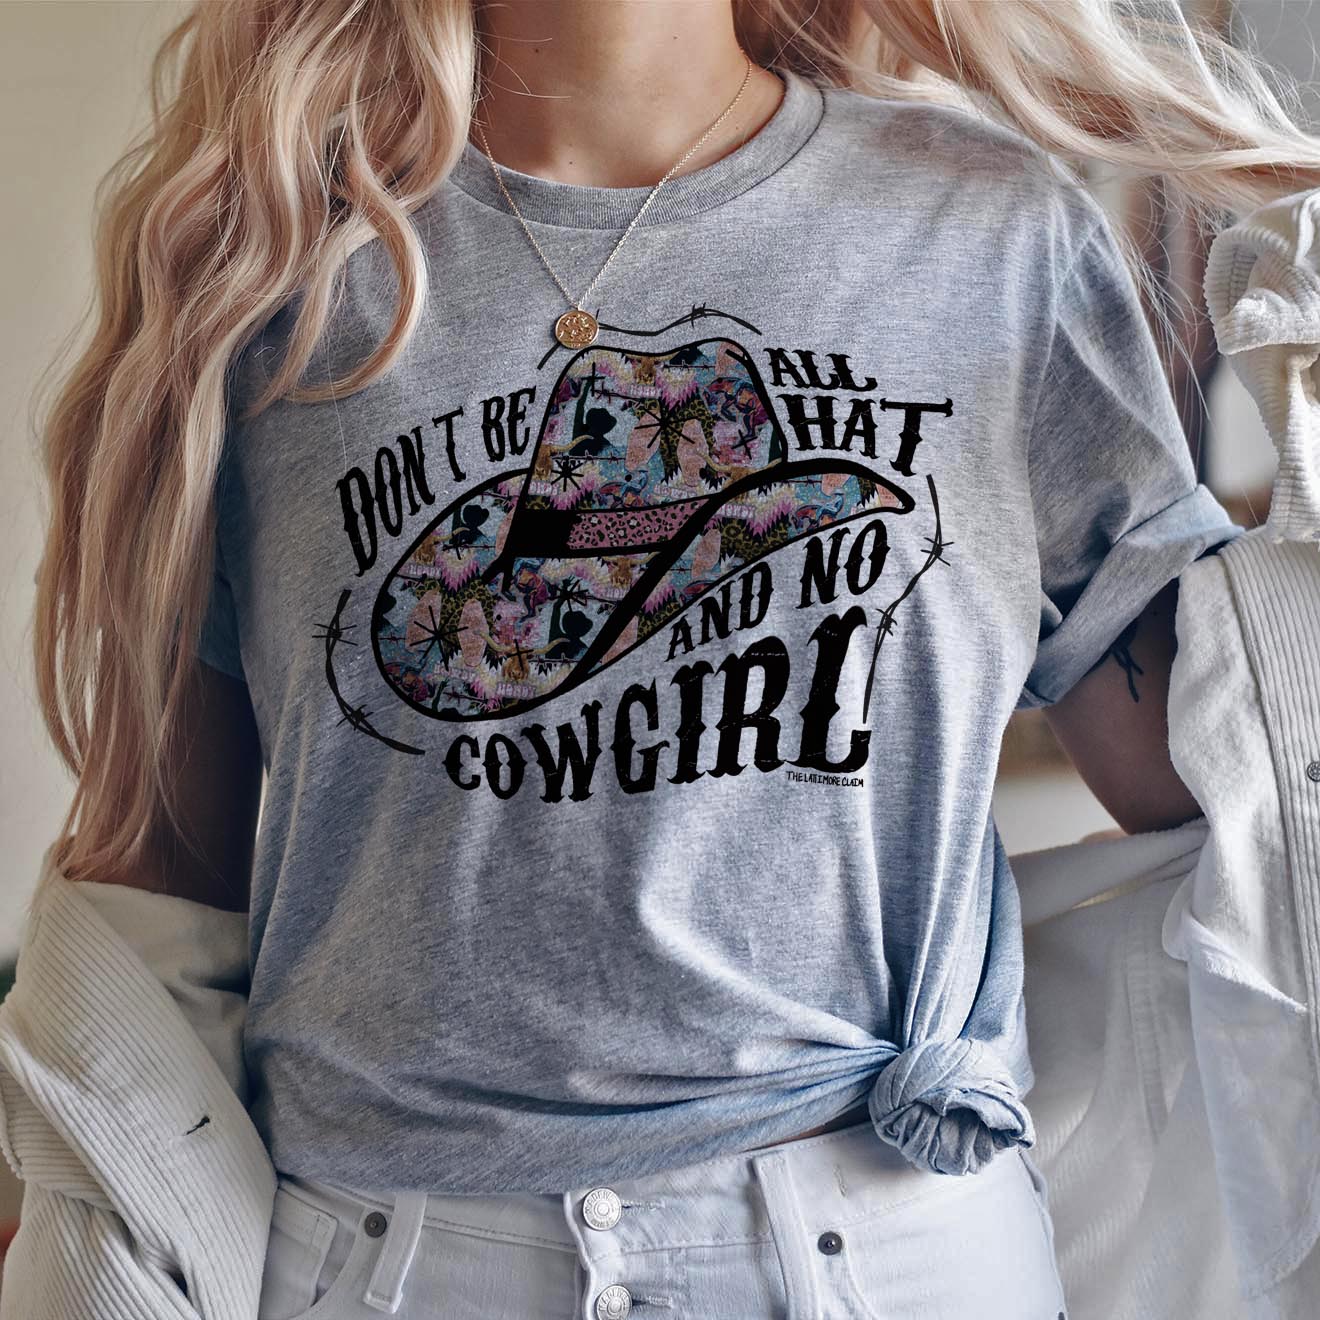 This heather grey Bella + Canvas graphic tee includes a crew neckline, short sleeves, and cute hand drawn design. of a cowboy hats when fun + bright prints, and the words "Don't Be All That And No Cowgirl". It also has black barbwire intertwined with the words and around the hat. This sweatshirt is shown in this photo to be styled with a necklace, white shacket, and light wash denim jeans. 